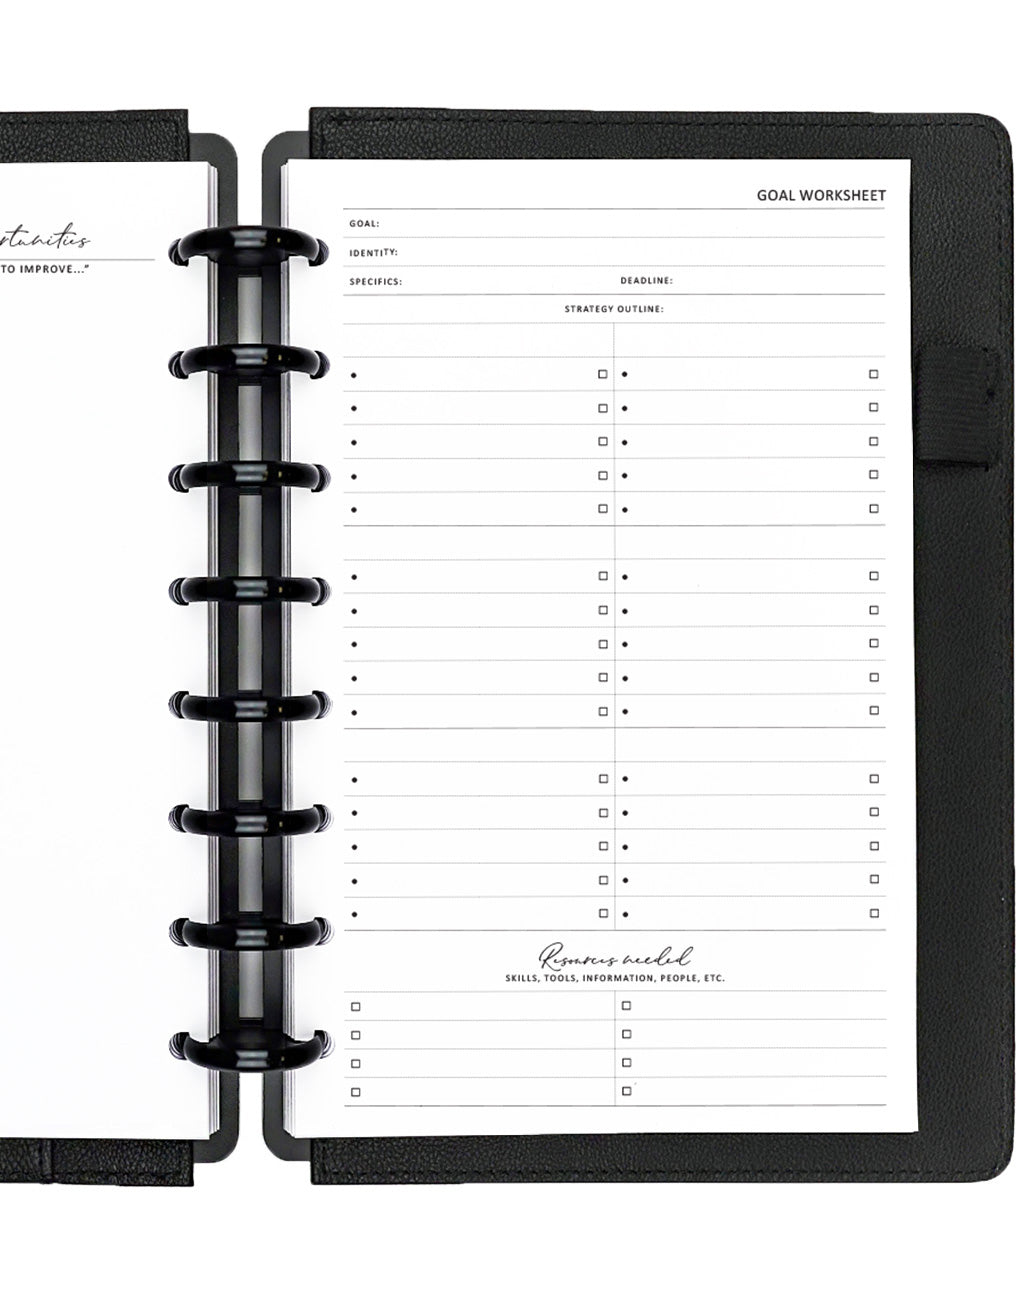 Goals worksheets planner insert refill pages for discbound planners, disc notebooks, and A5 ringbound planner systems by Jane's Agenda.